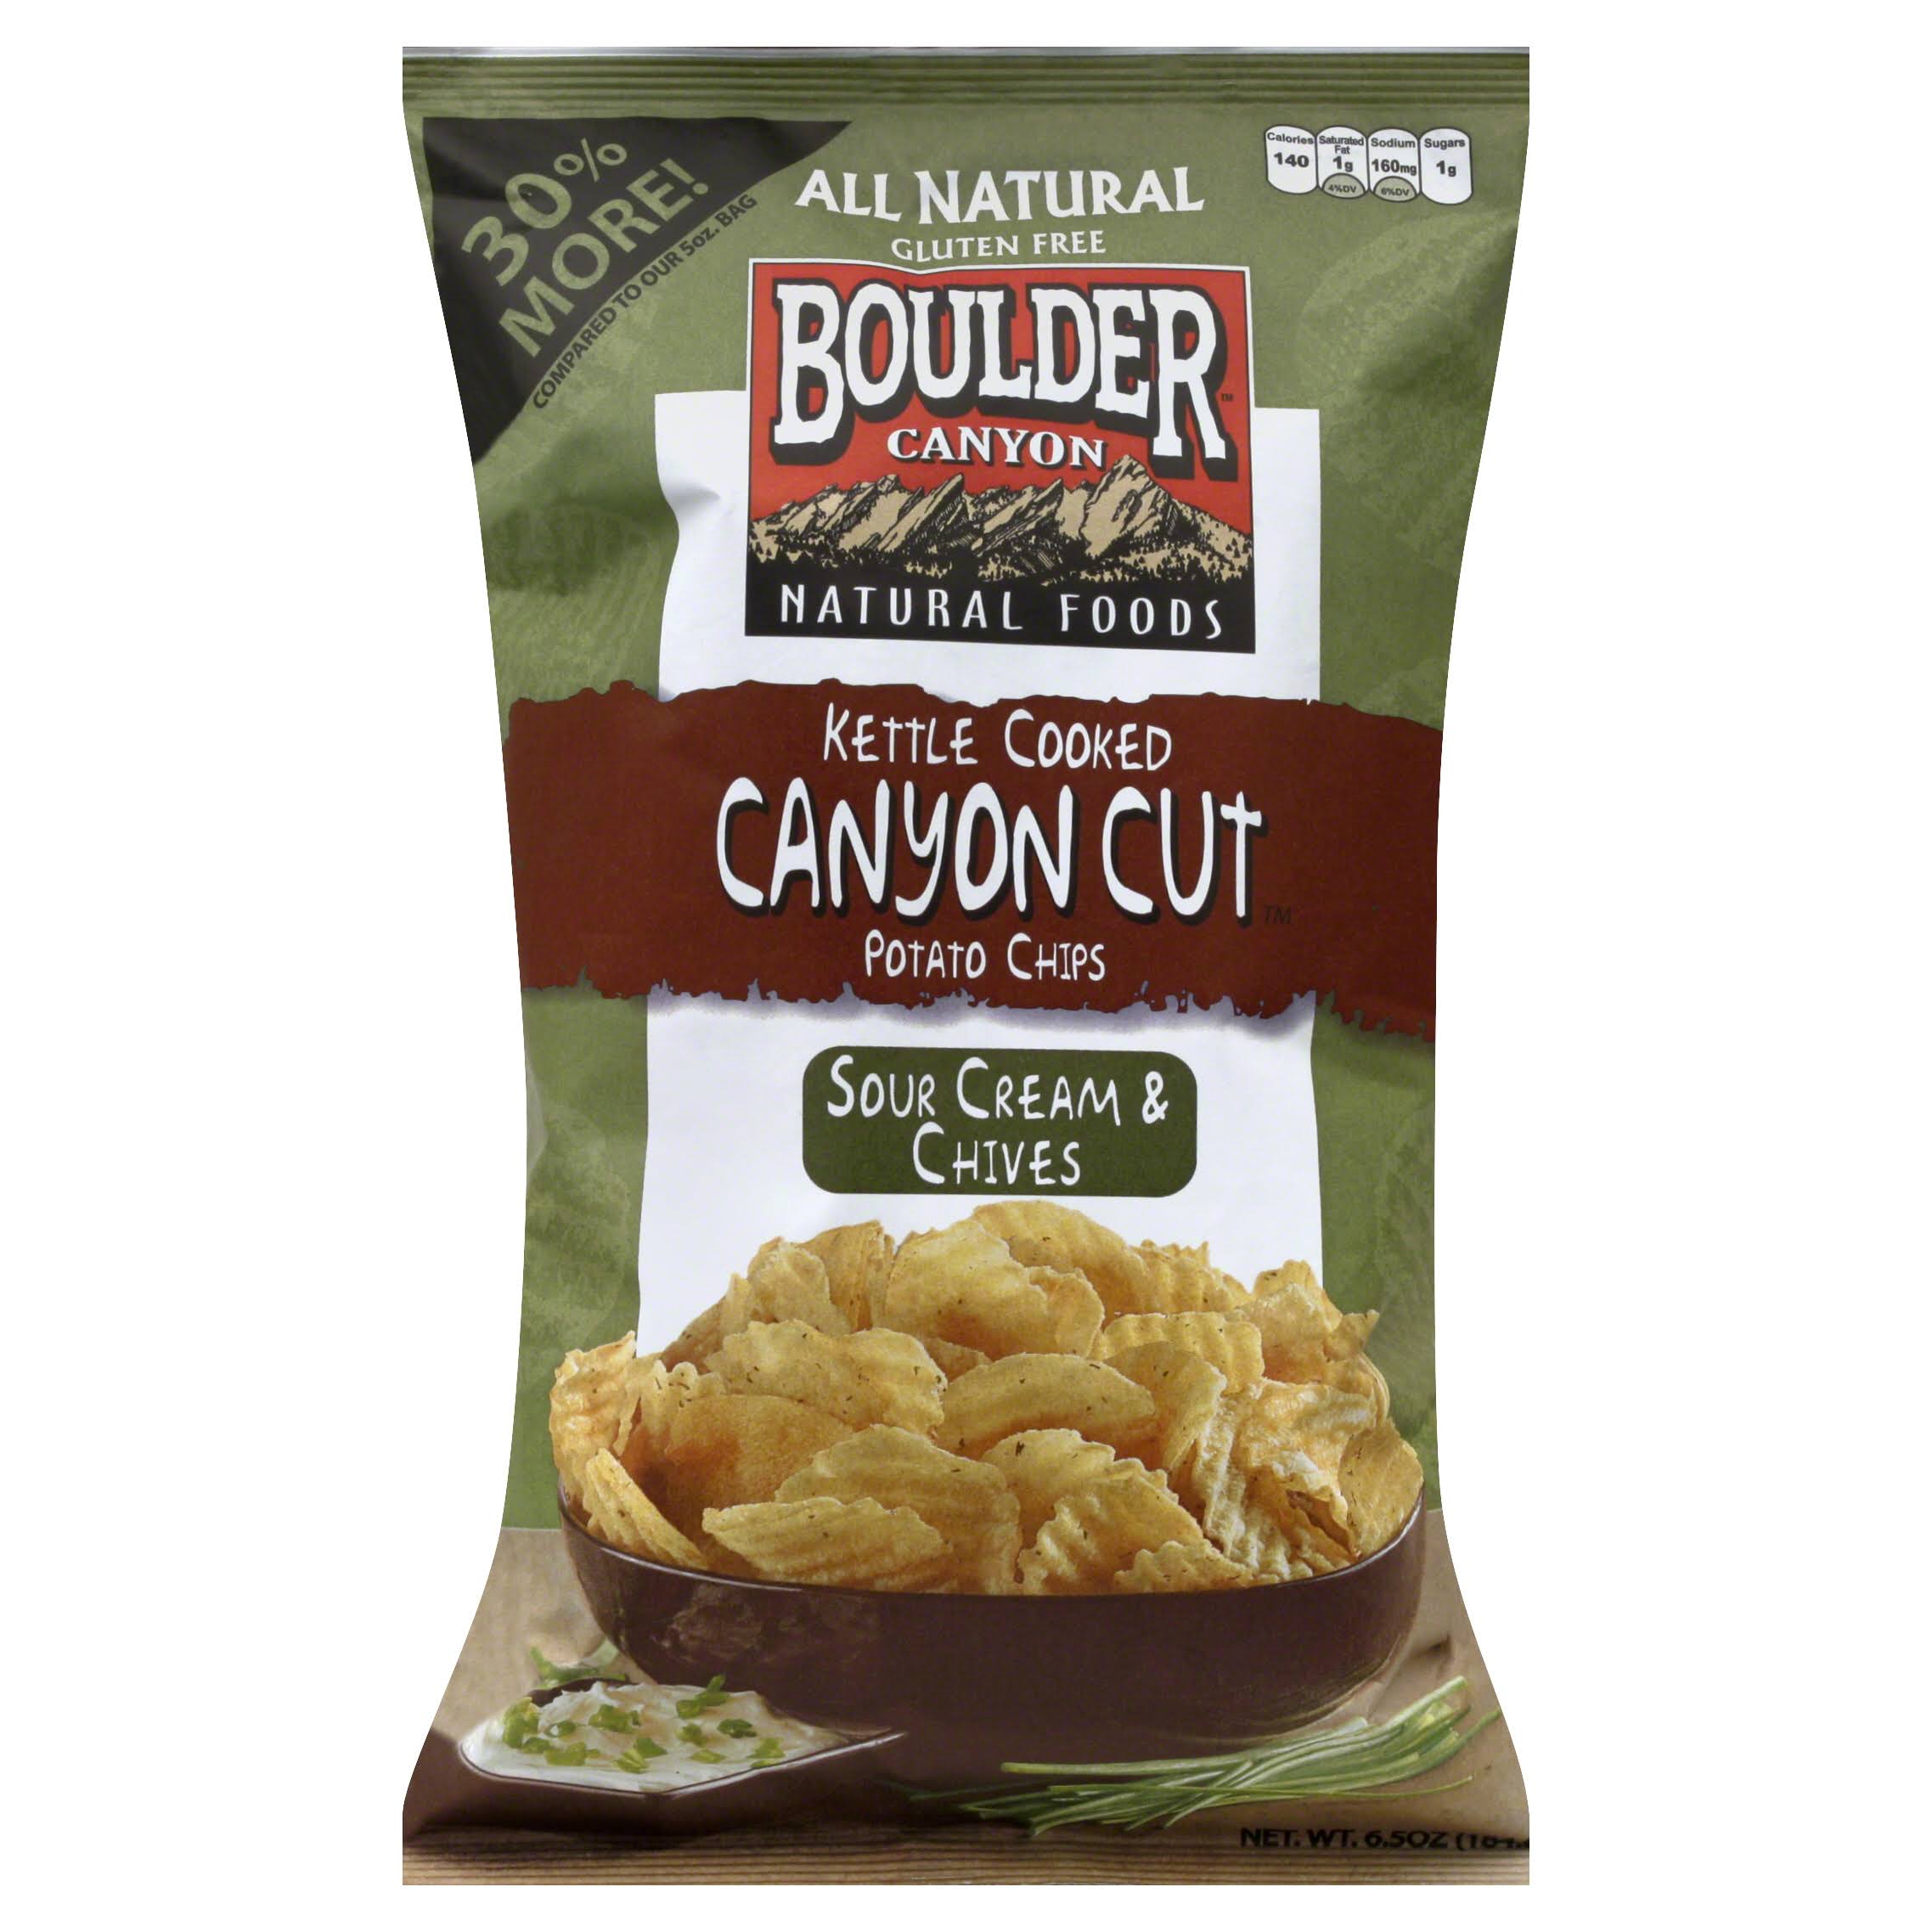 Boulder Canyon Cut Kettle Cooked Potato Chips - Sour Cream and Chives, 6.5oz